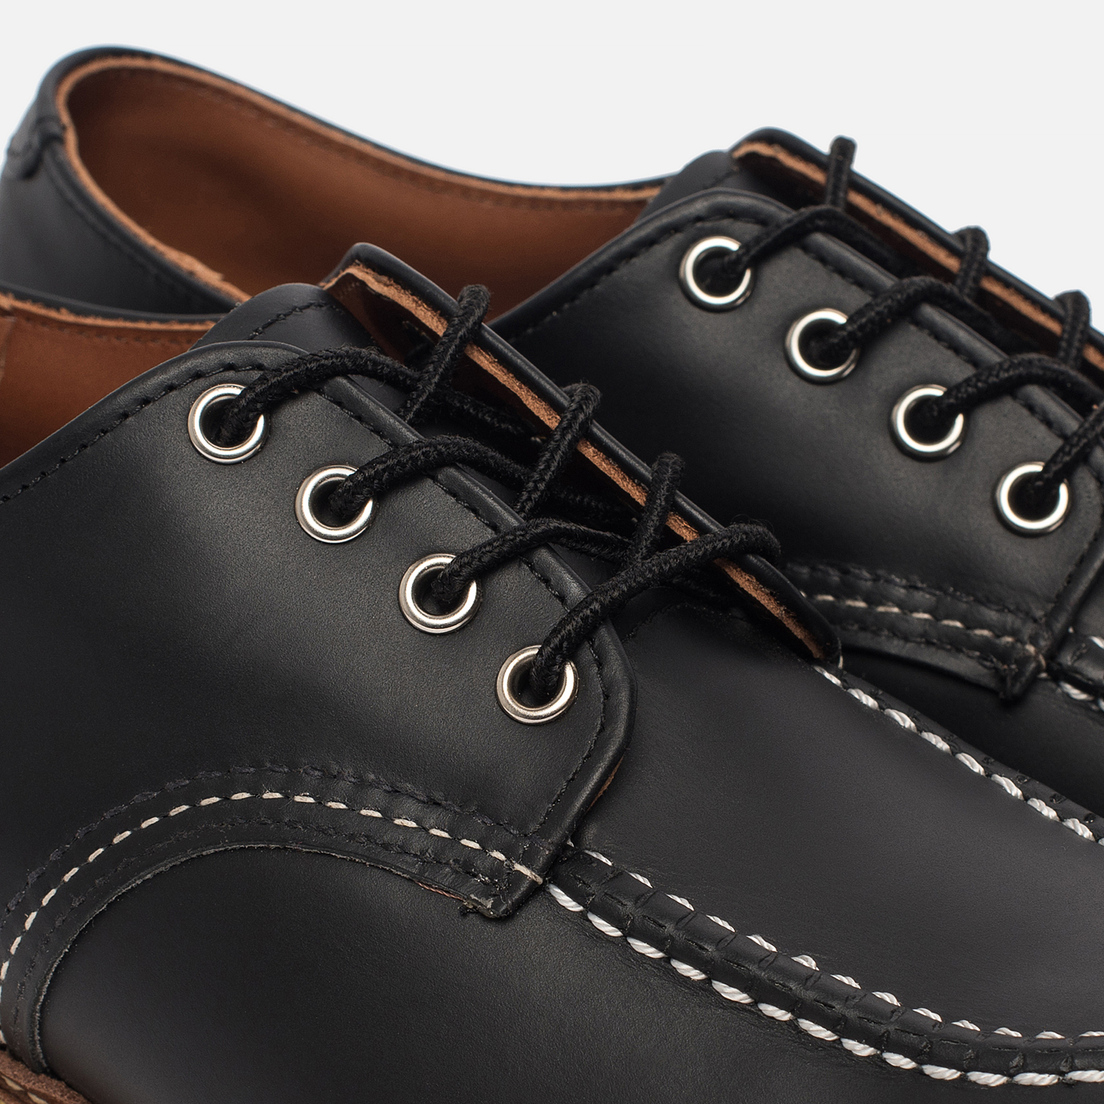 Red Wing Shoes Мужские ботинки 8106 Classic Oxford Leather